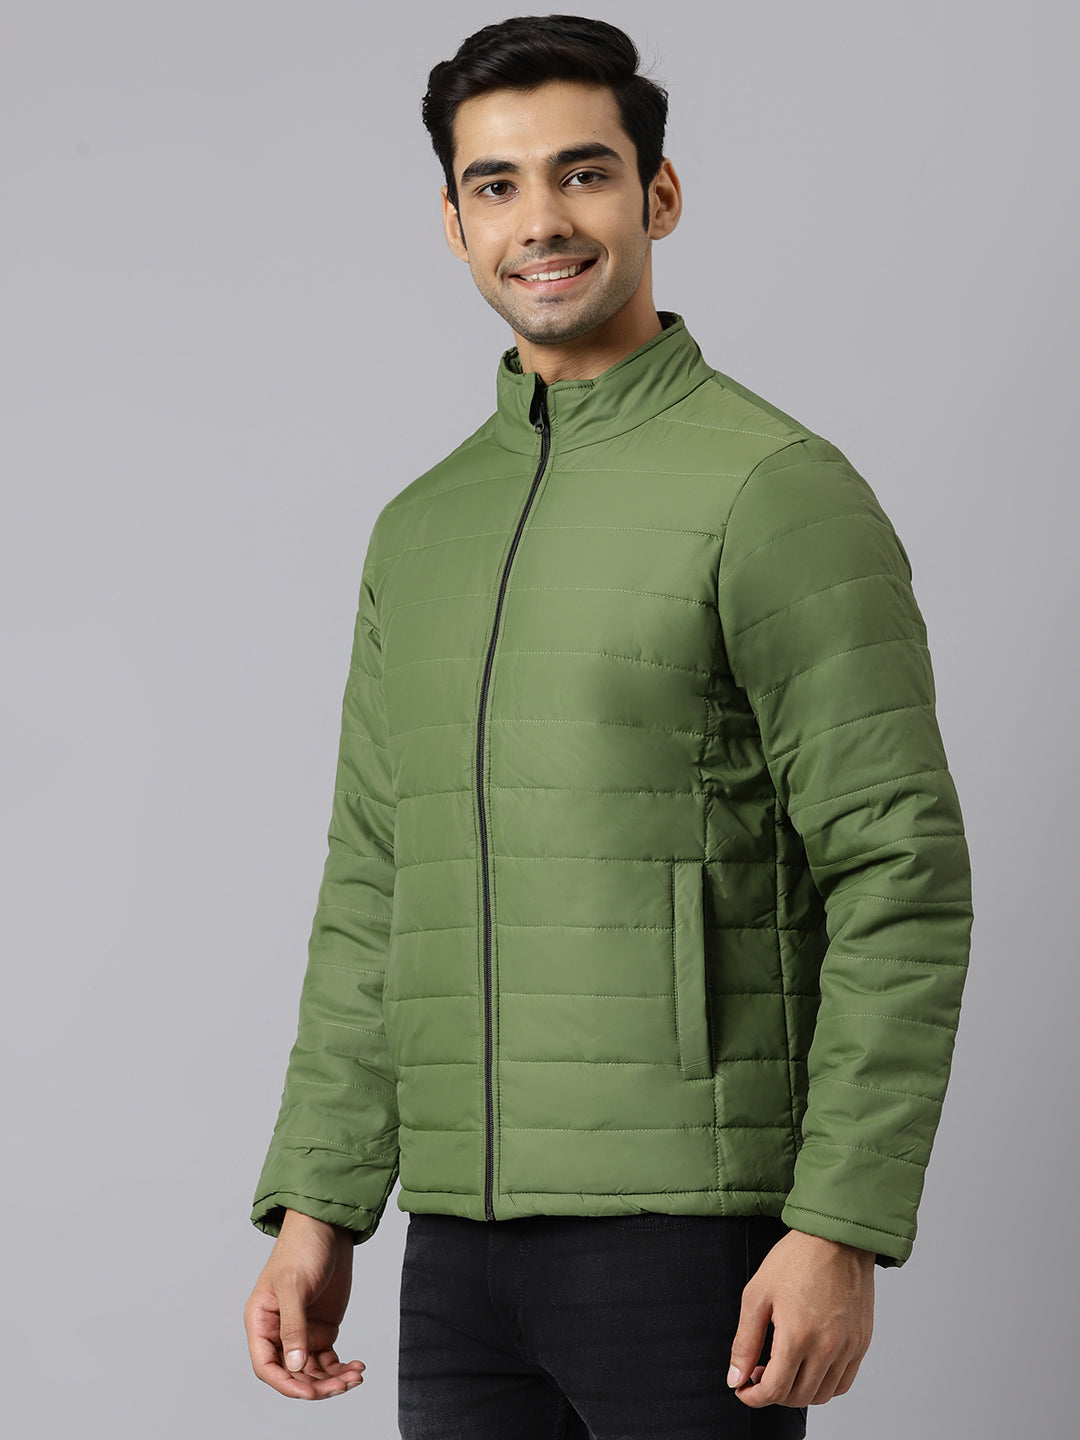 Buy Green Evapouration Jacket for Women Online at Columbia Sportswear |  480727